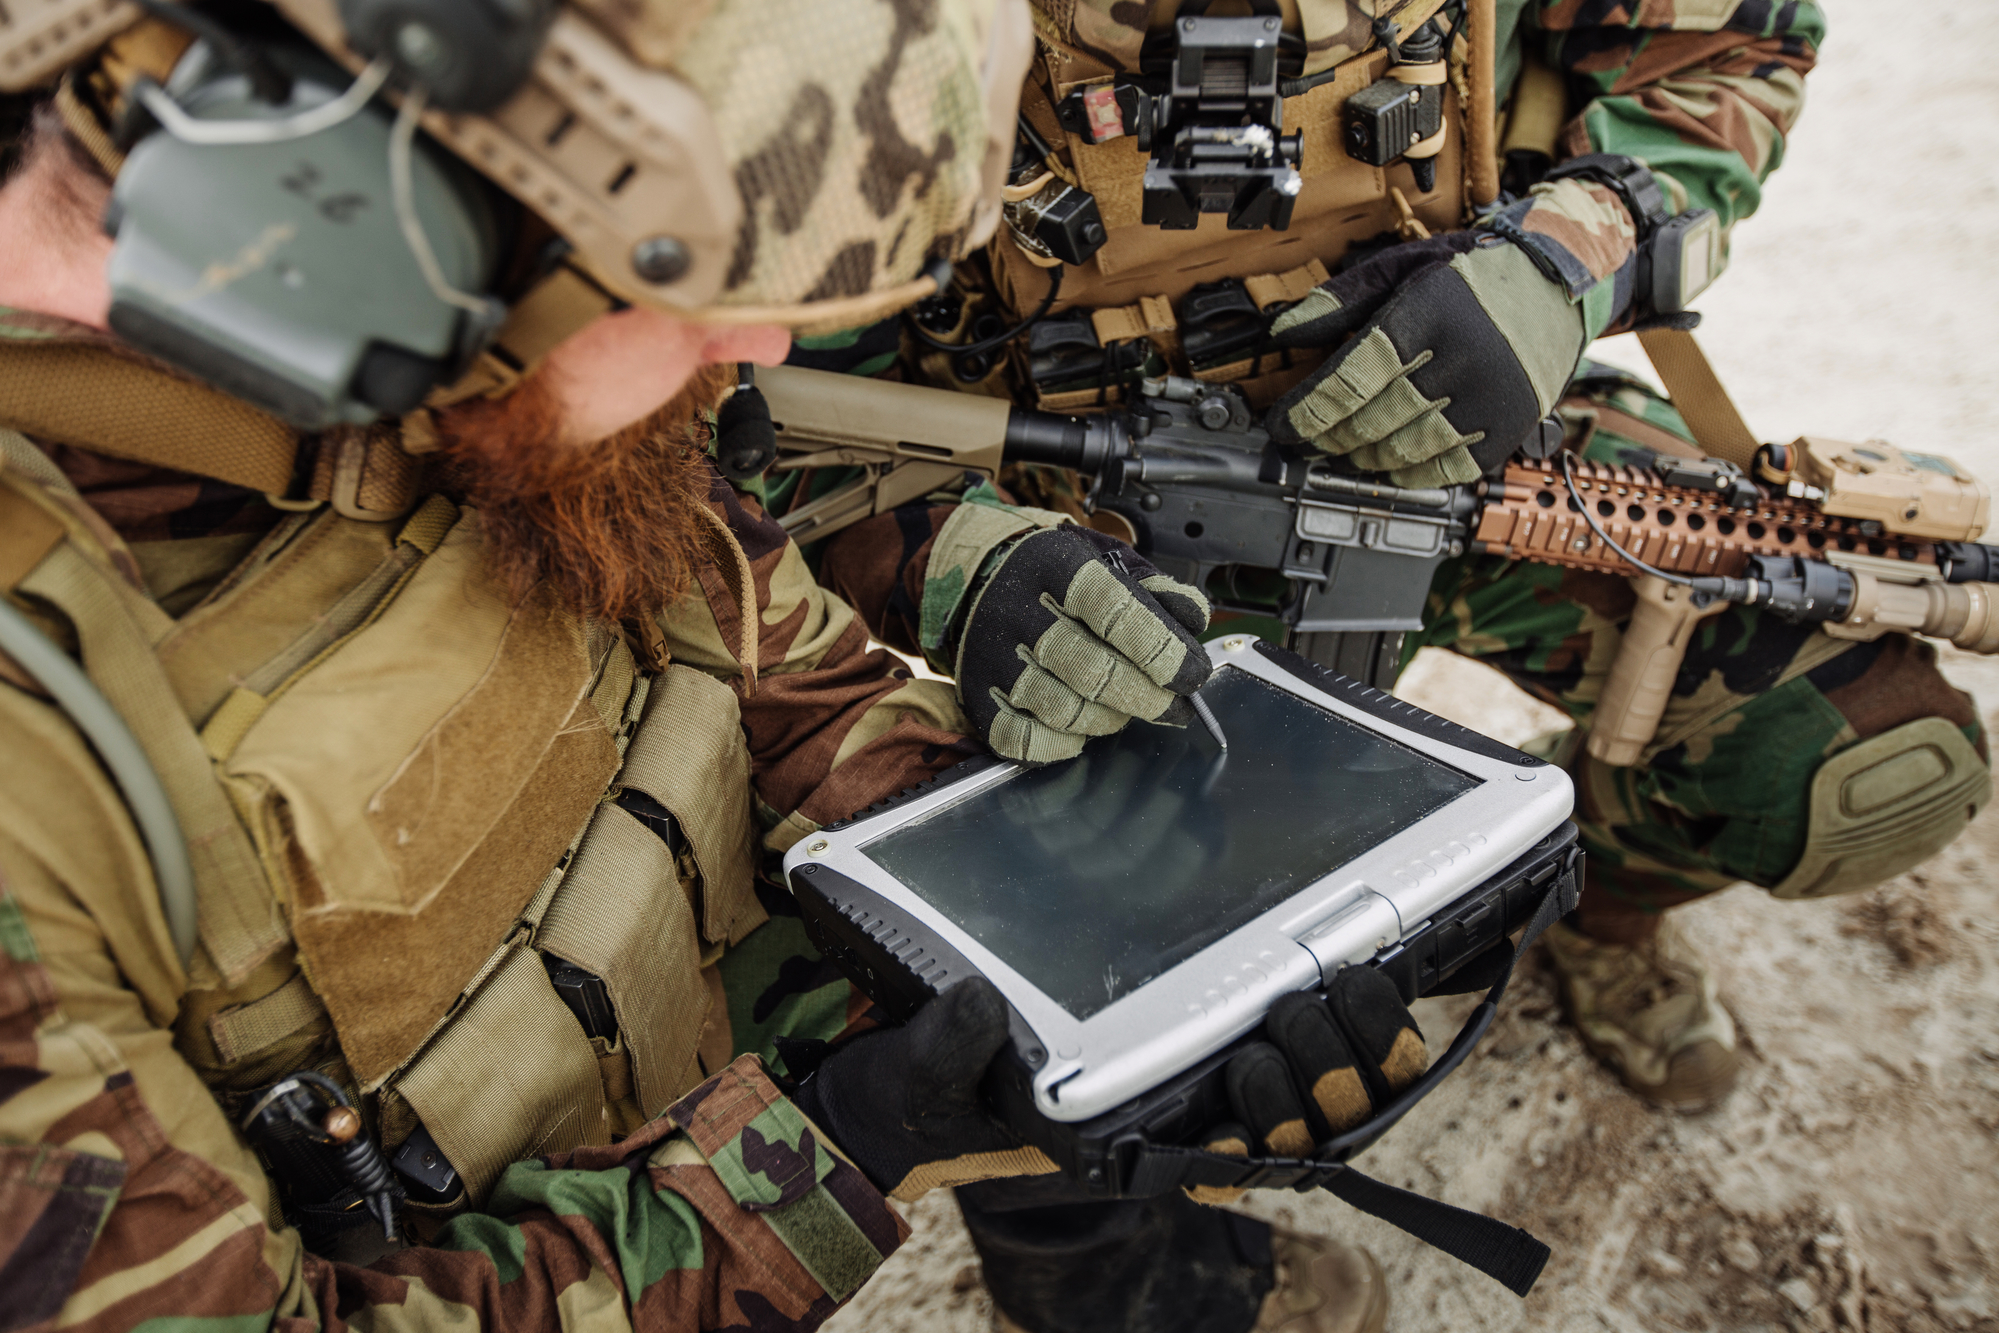 Army personnel working on technology